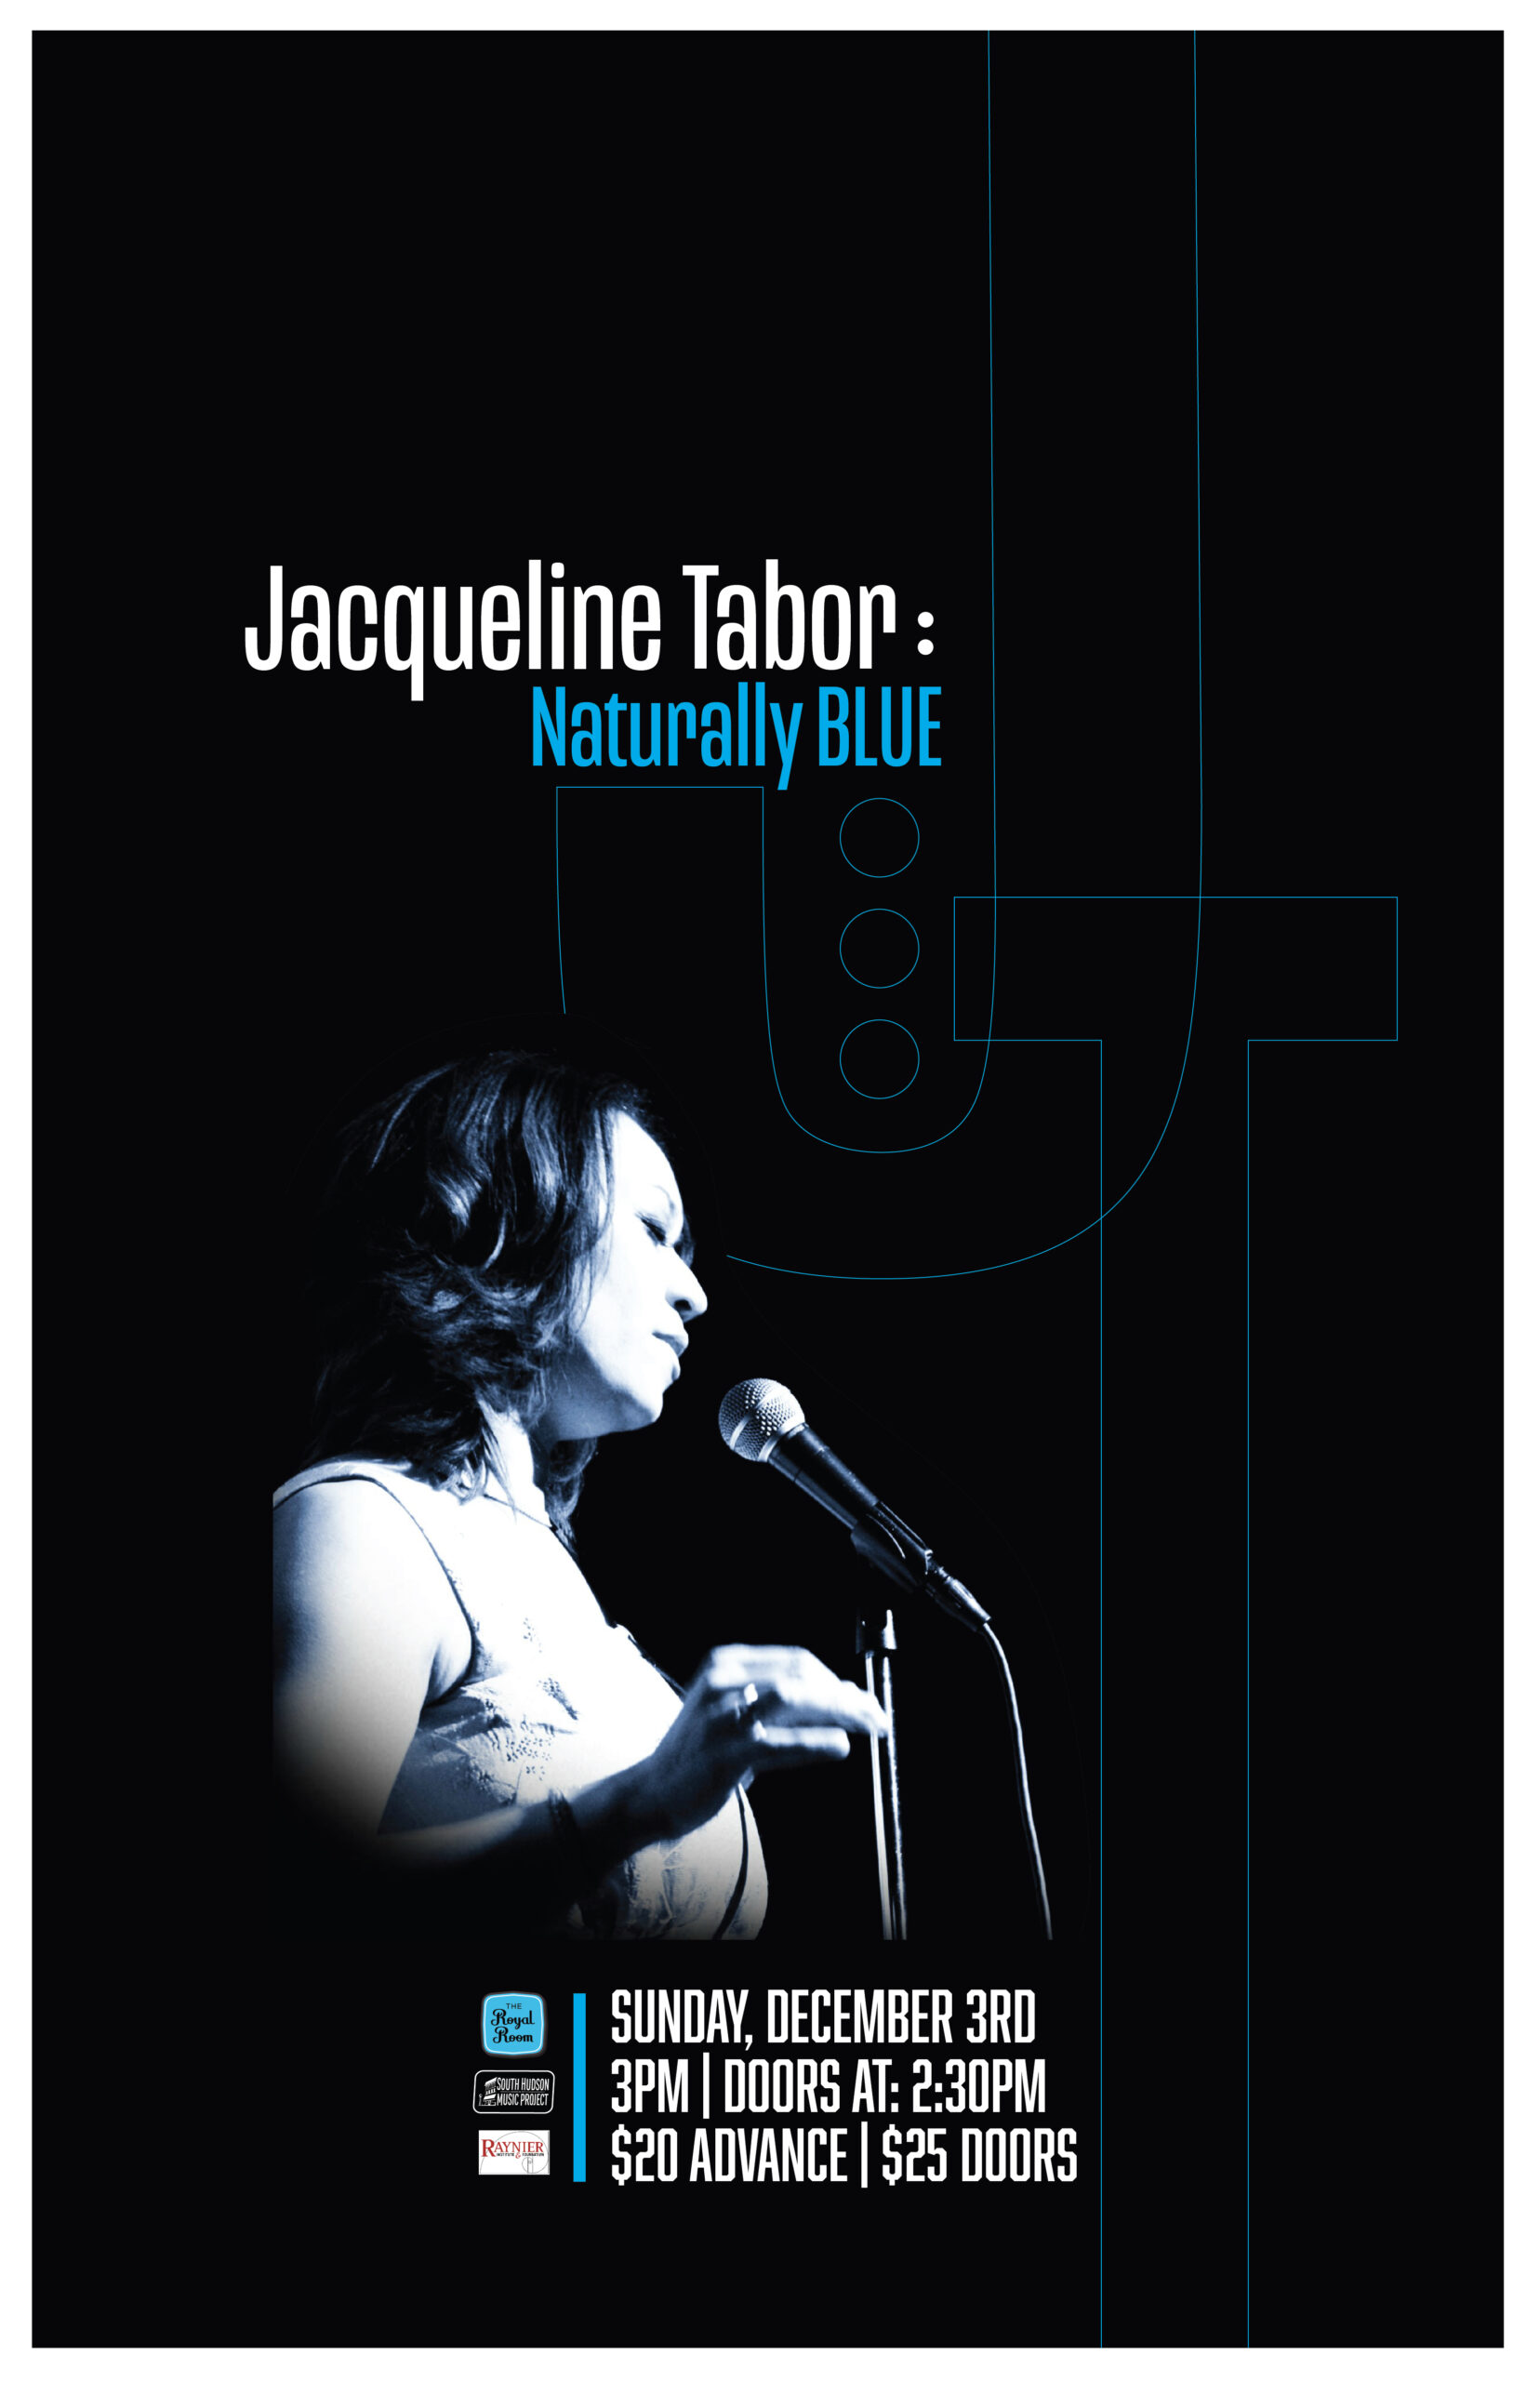 Jacqueline Tabor: Naturally Blue